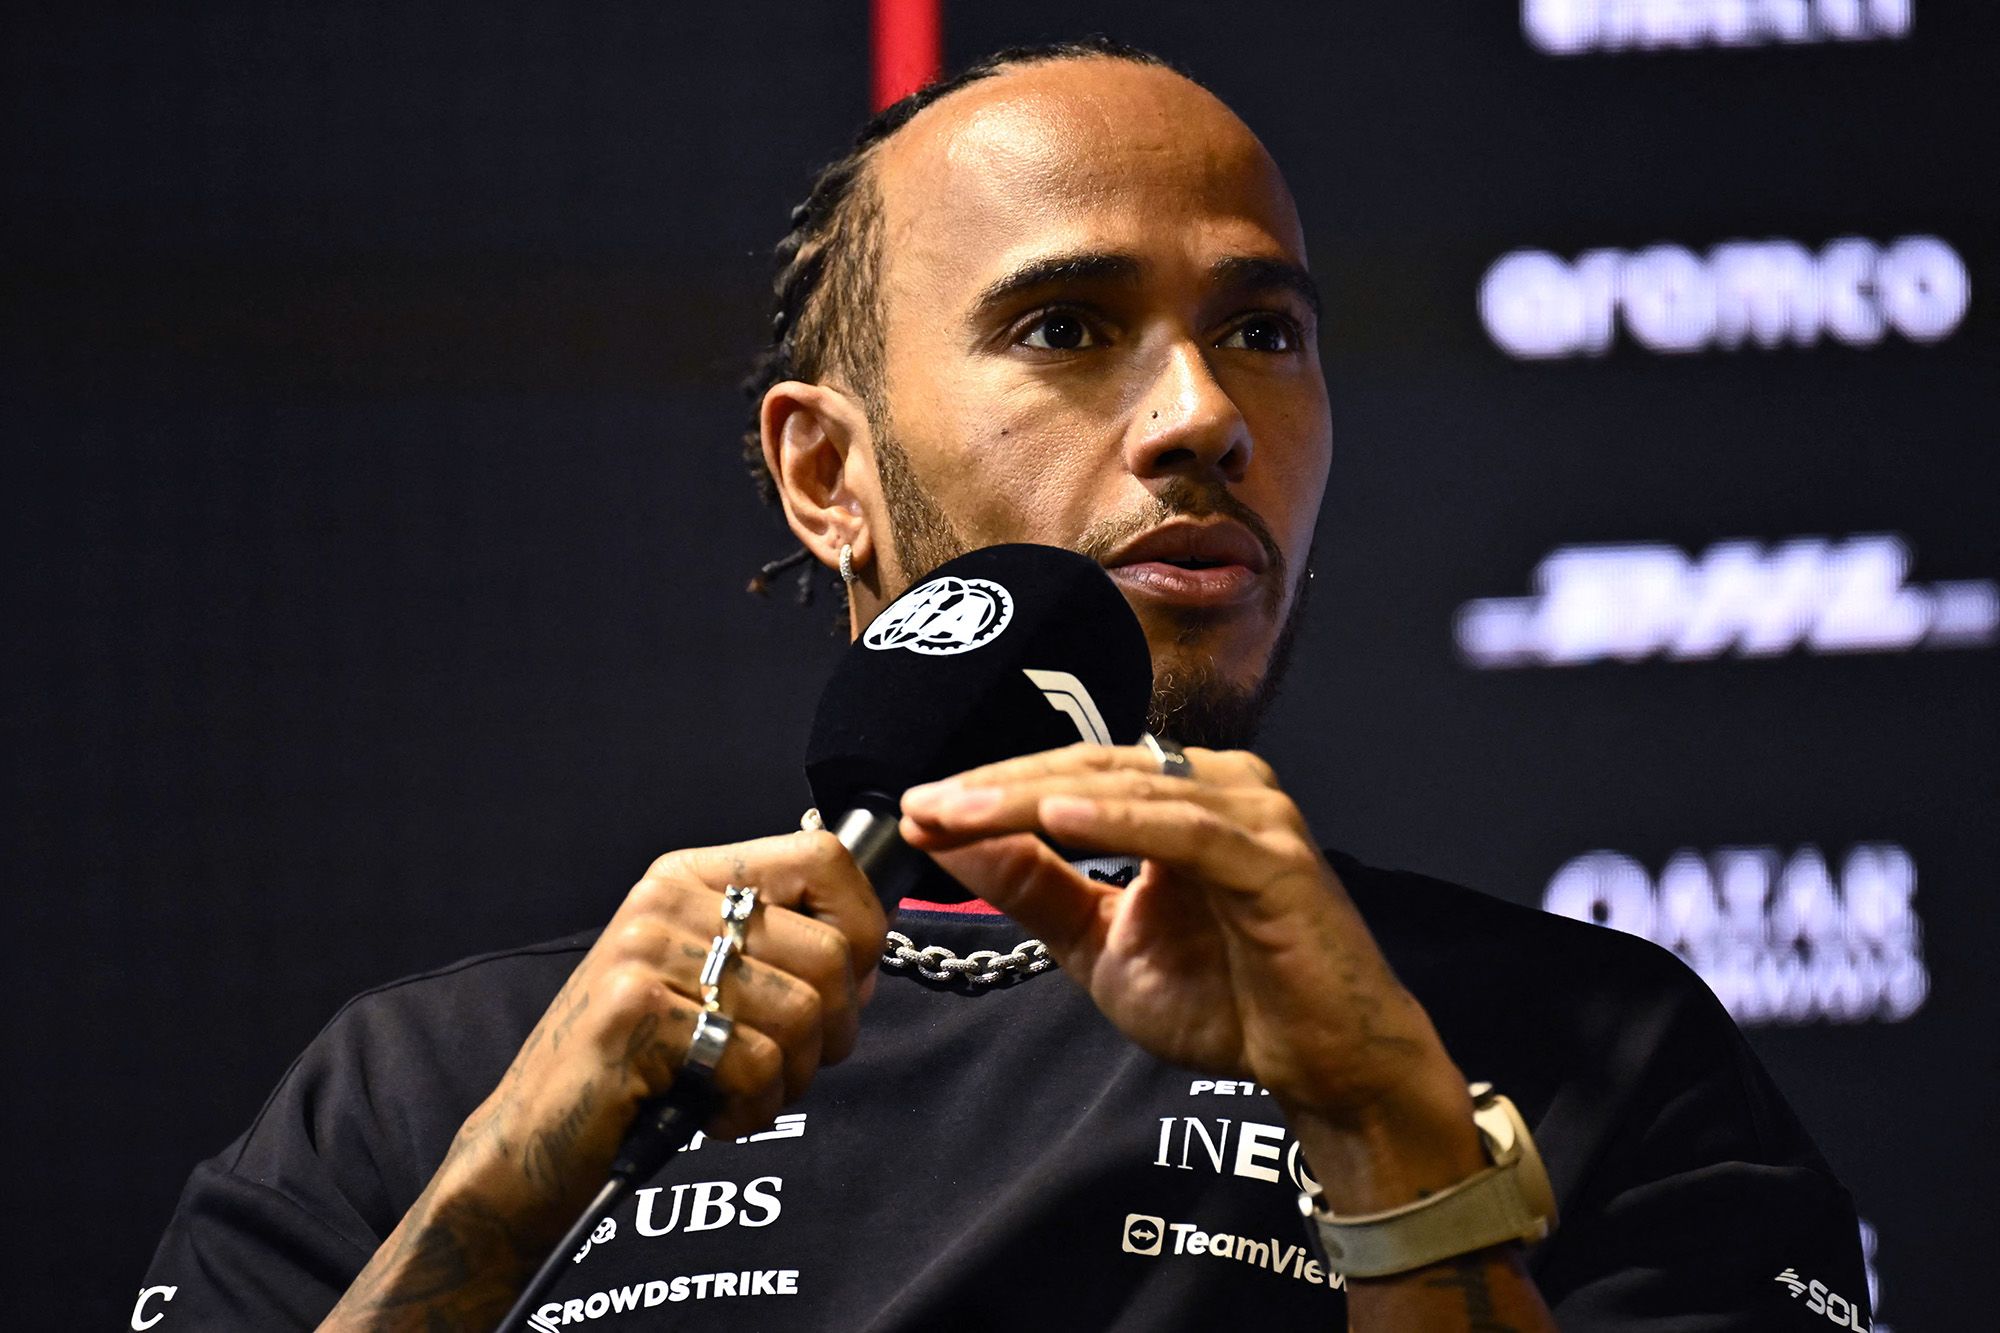 Lewis Hamilton: 'I'm Not Going to Stay Quiet